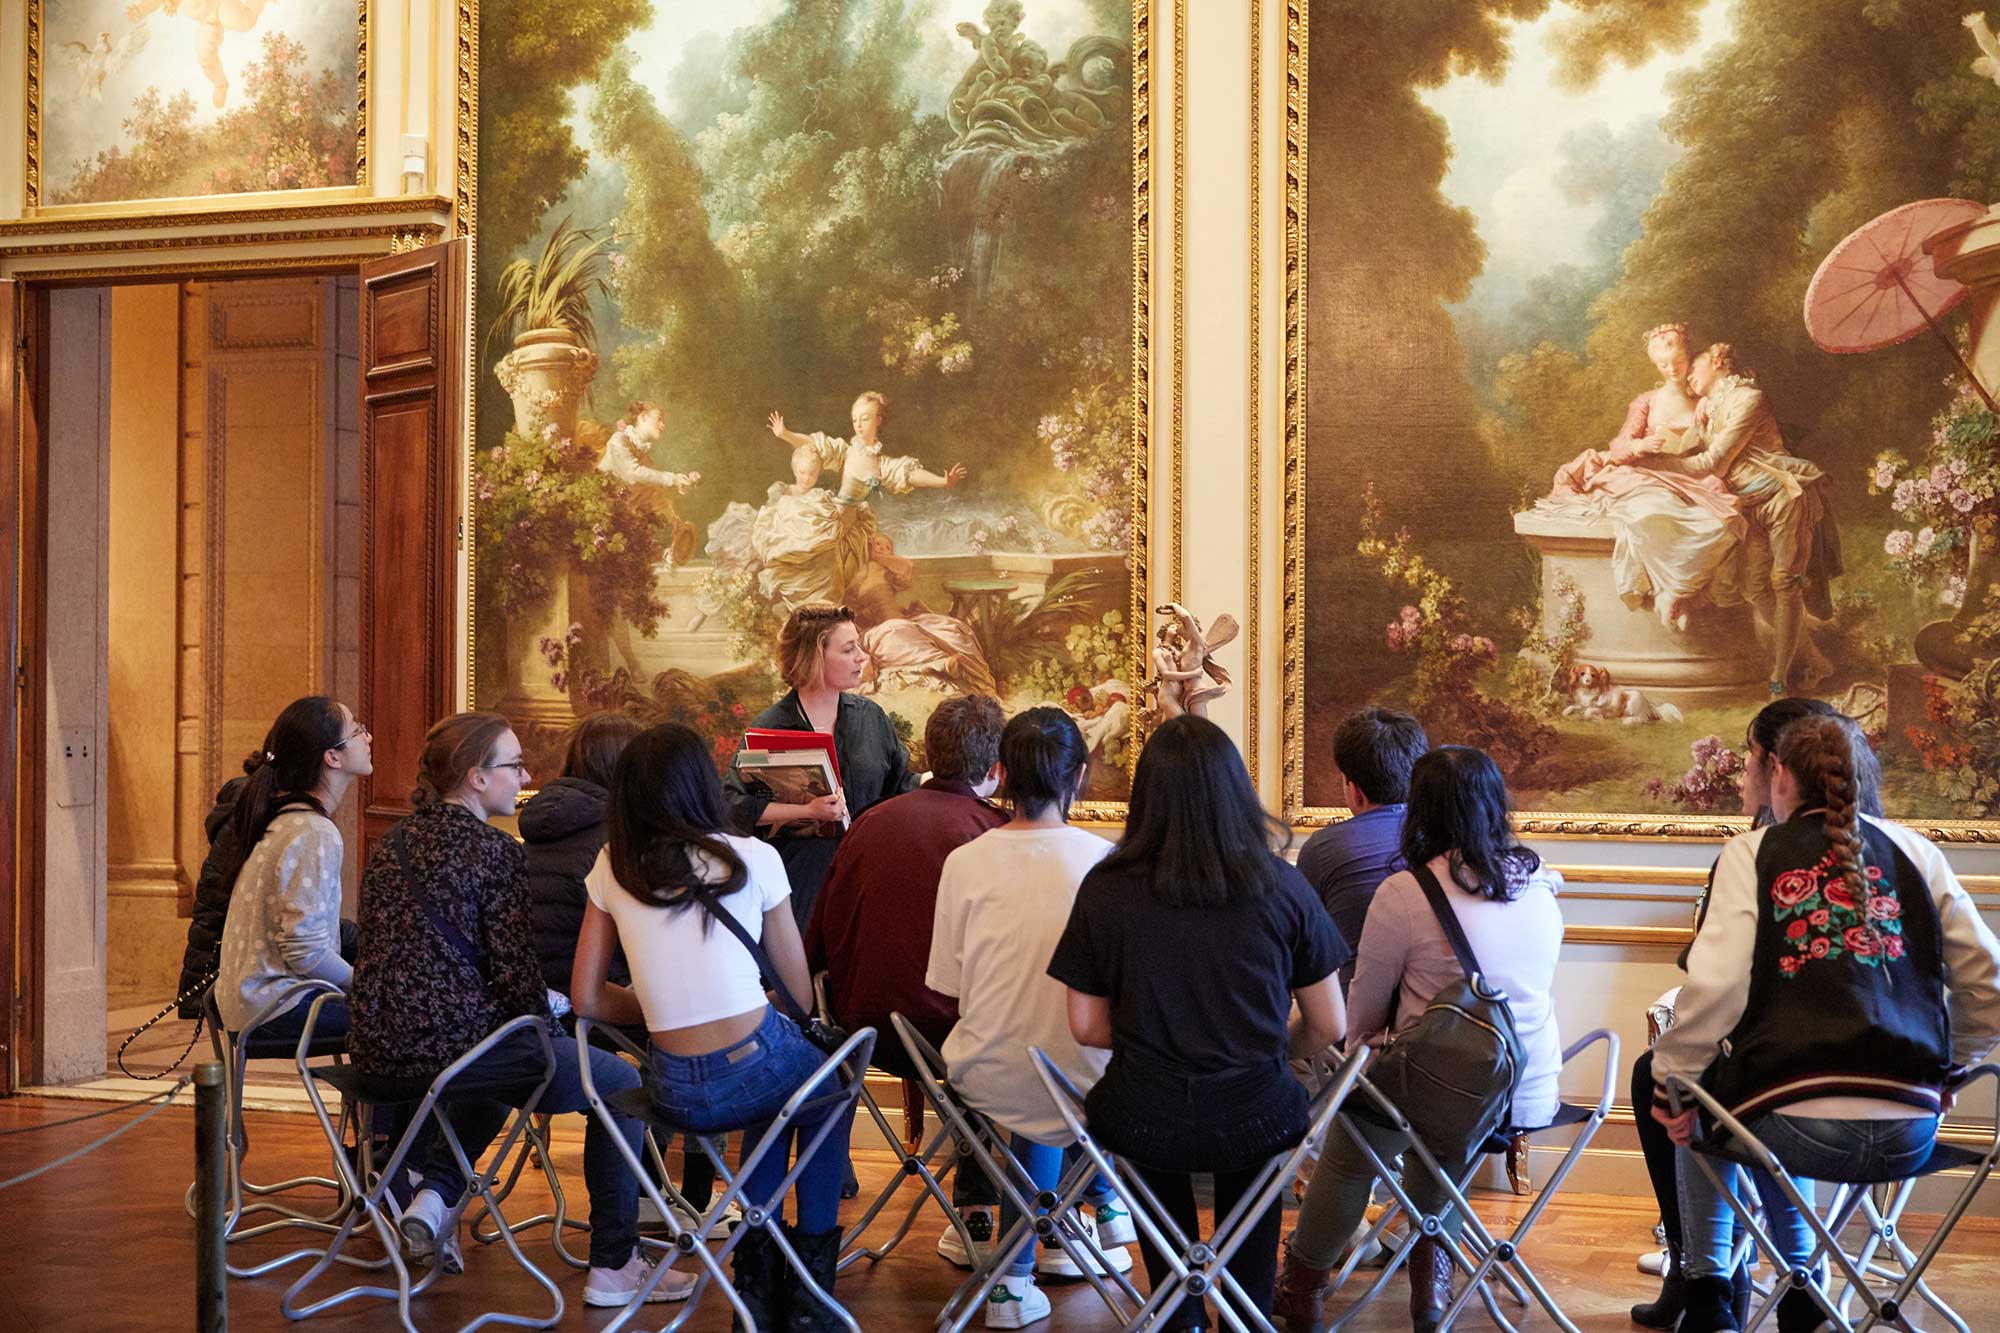 students in the Frick Collection gallery, with educator standing in front of paintings